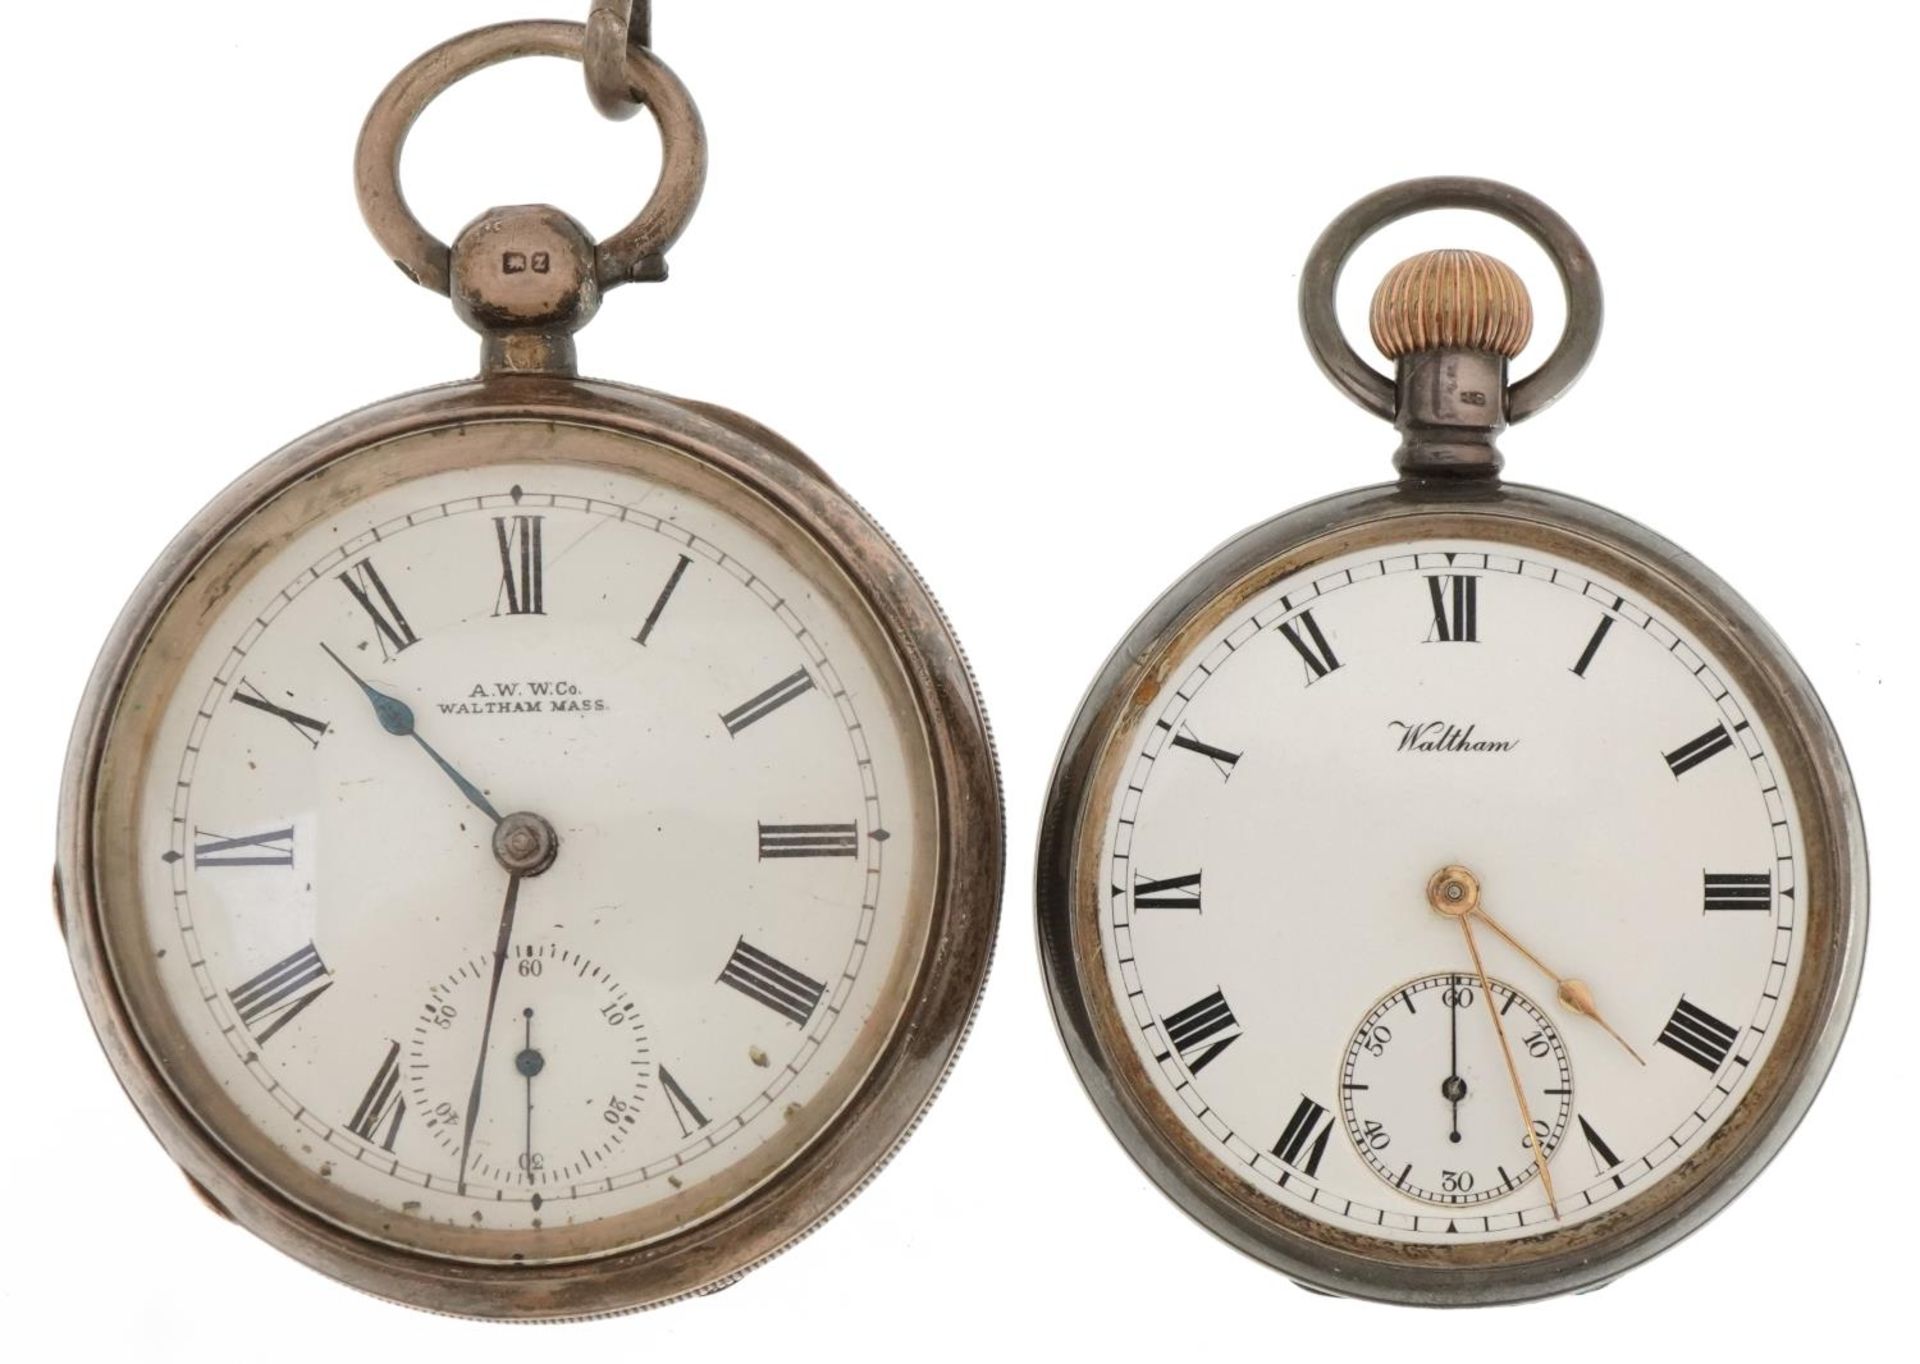 Waltham, two gentlemen's silver open face pocket watches with enamelled dials, one with silver watch